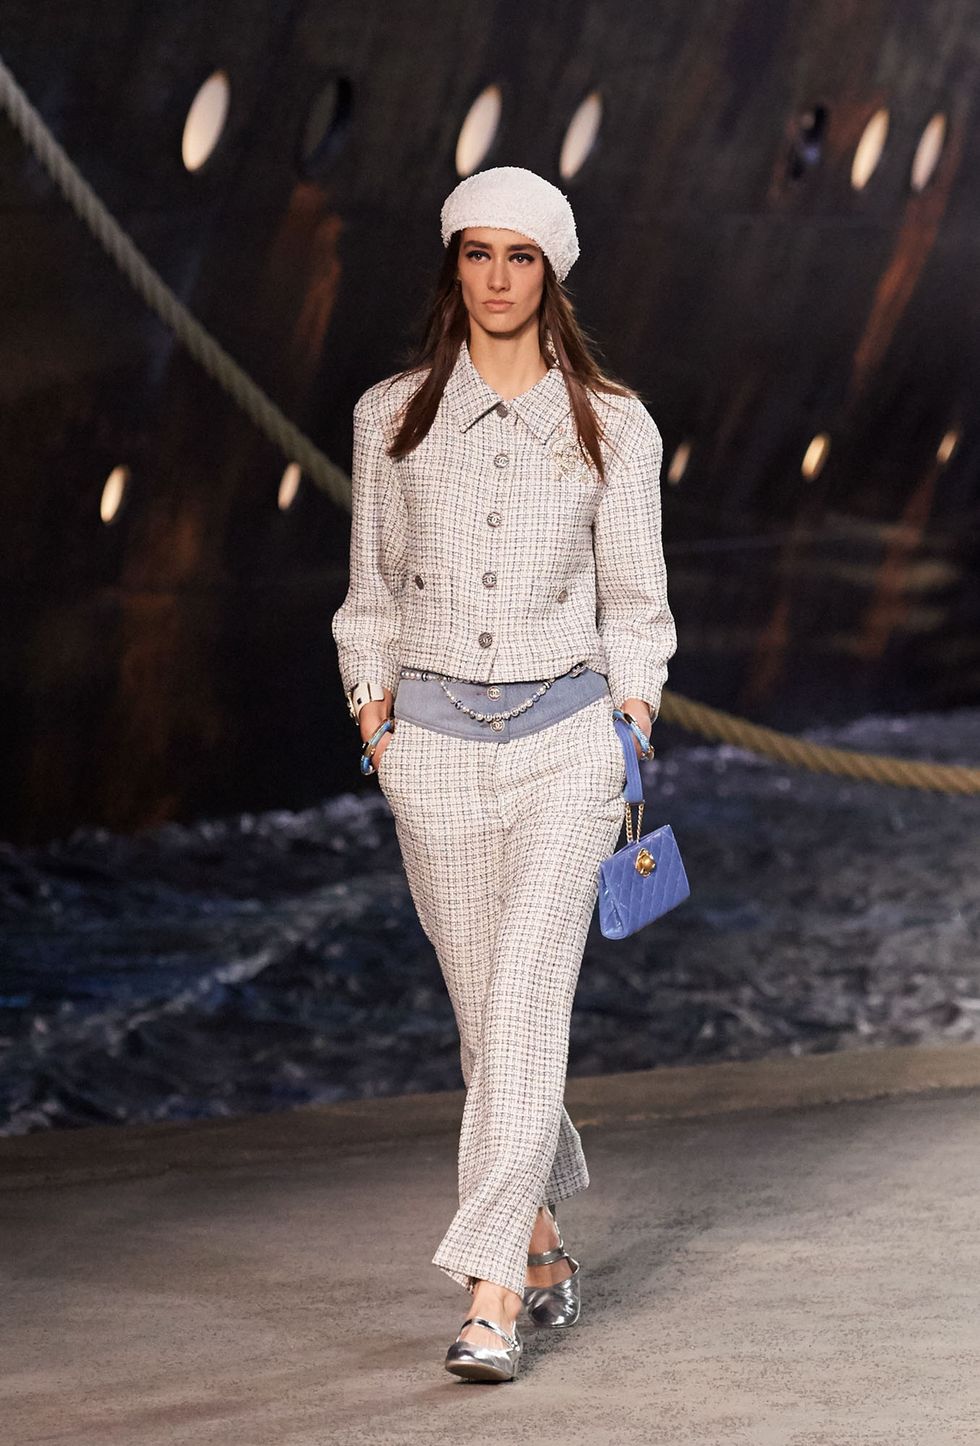 88 Looks From Chanel Cruise 2018 Show – Chanel Cruise 2018 Runway